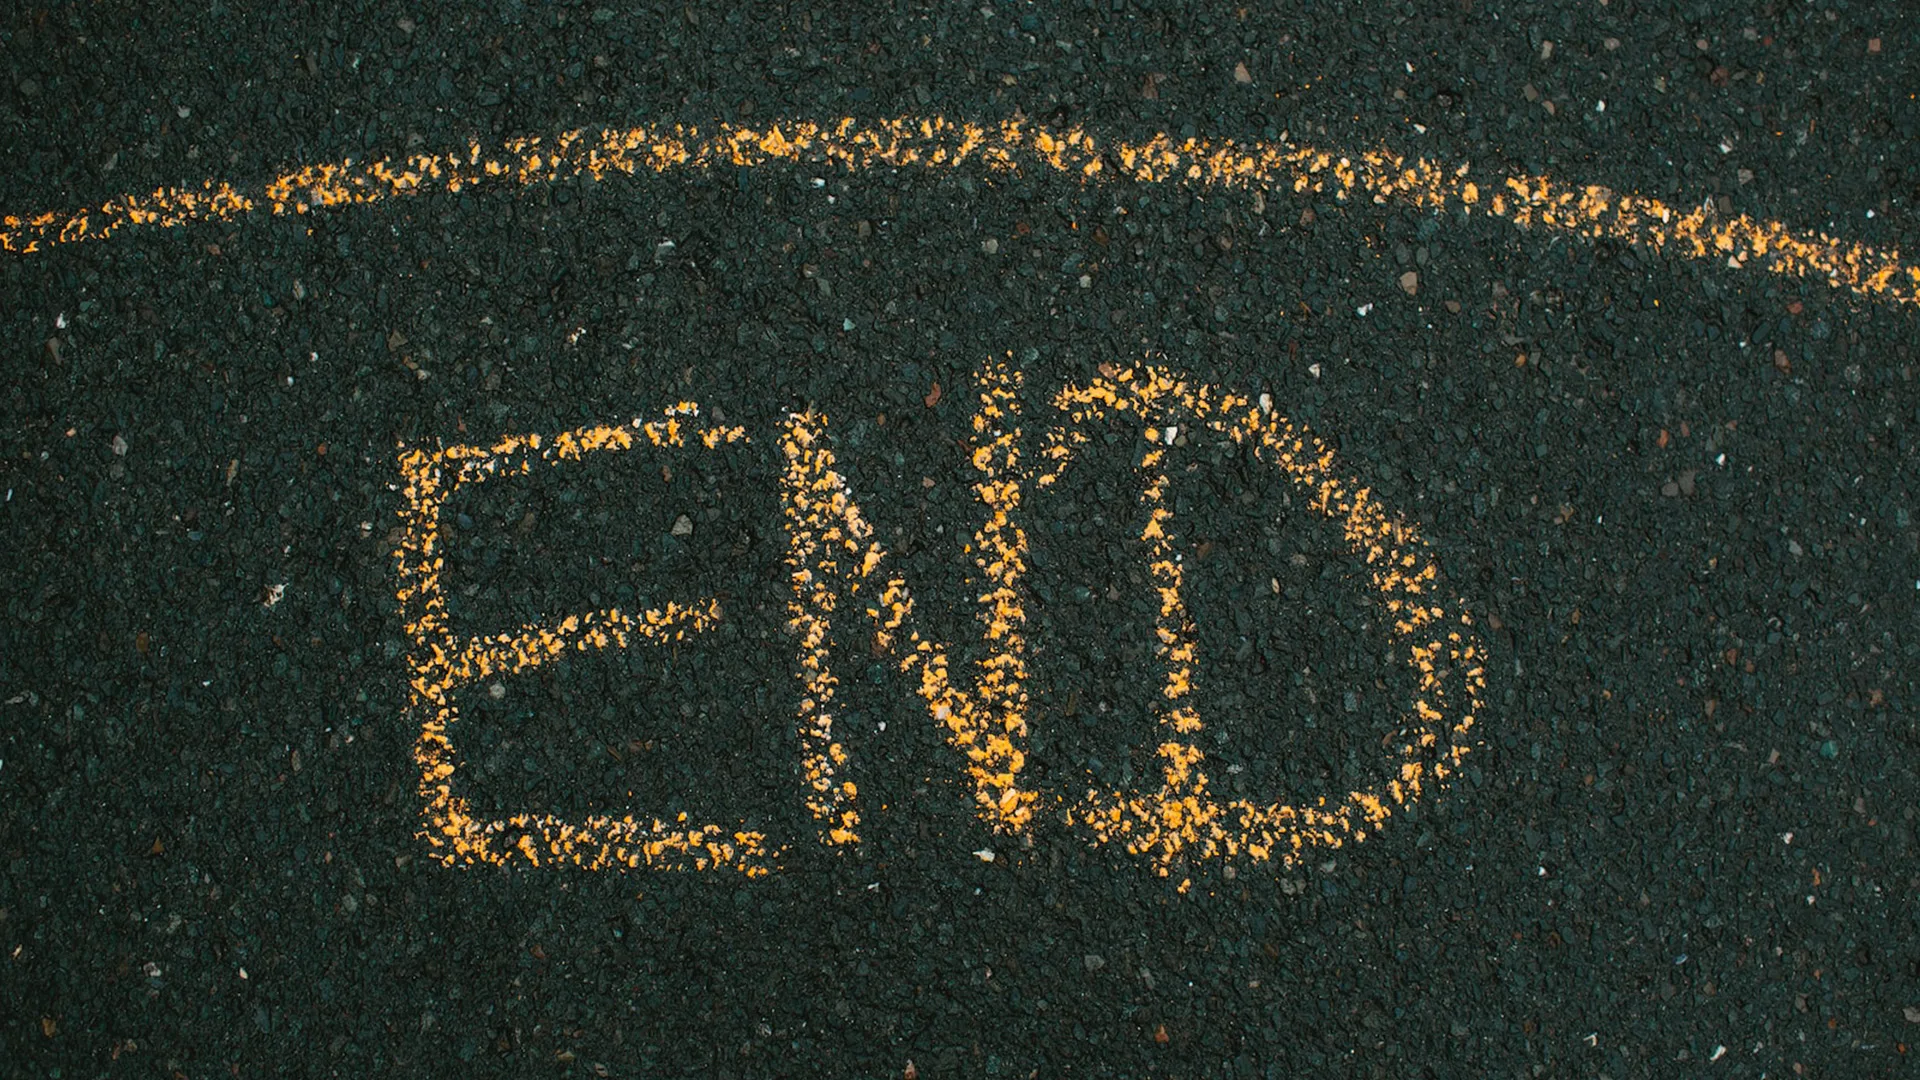 The END written in yellow on a dark coloured floor